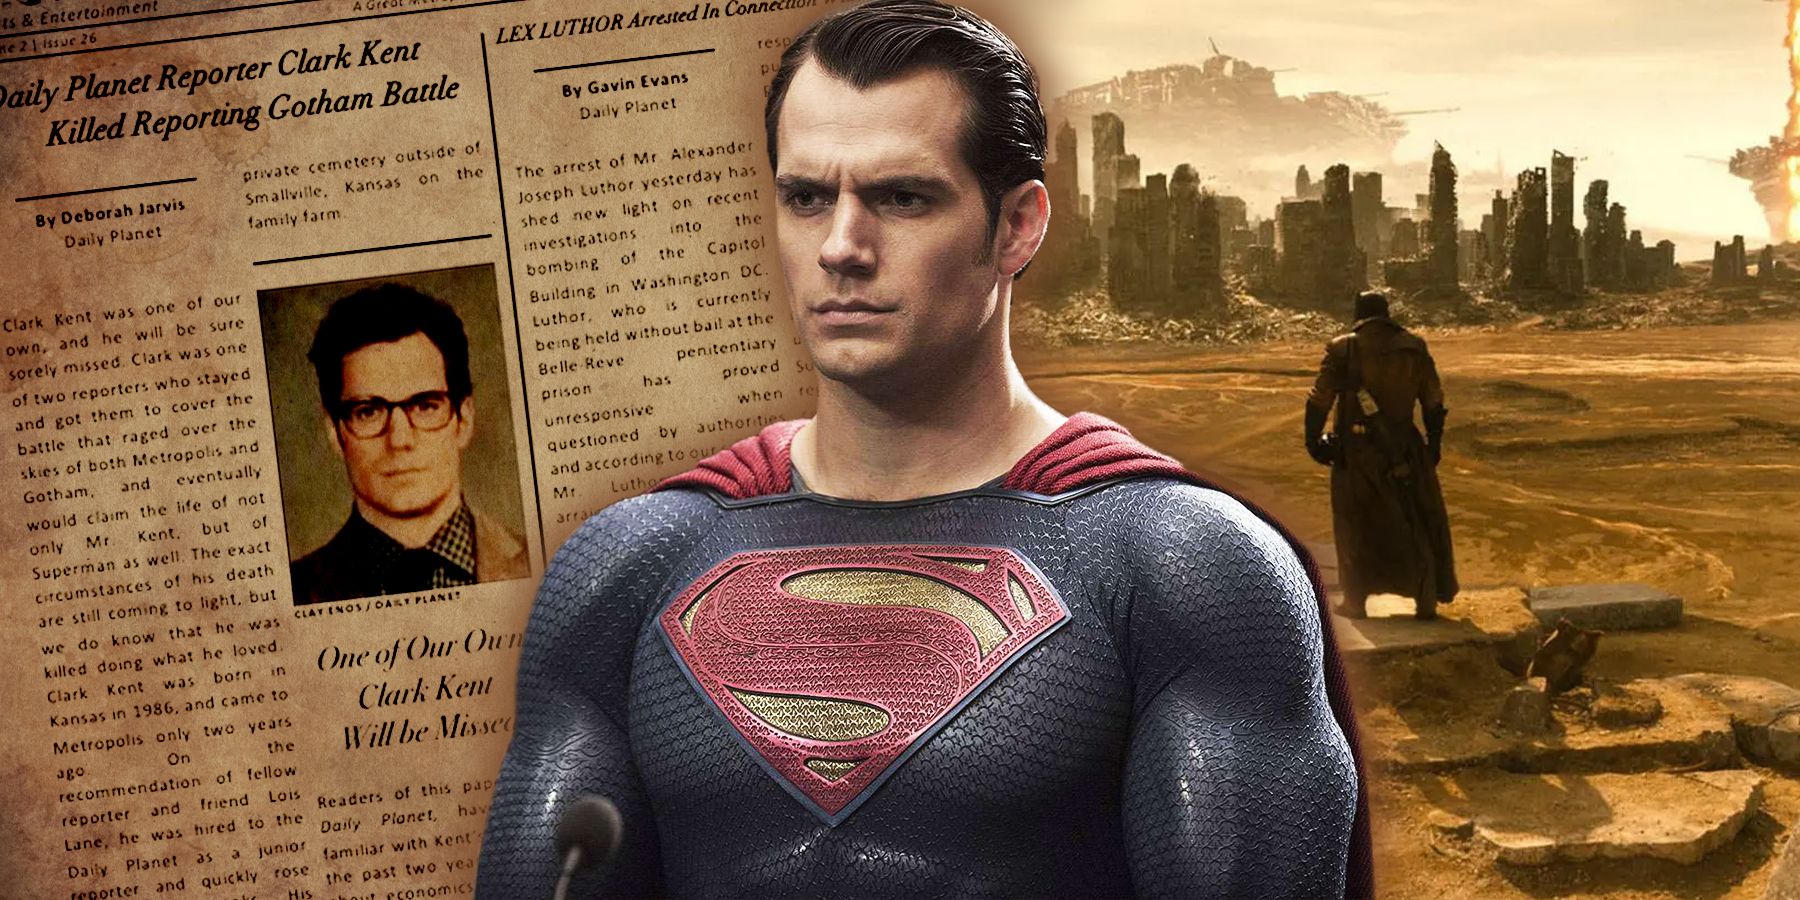 Top 10 moments of Henry Cavill in the DCEU